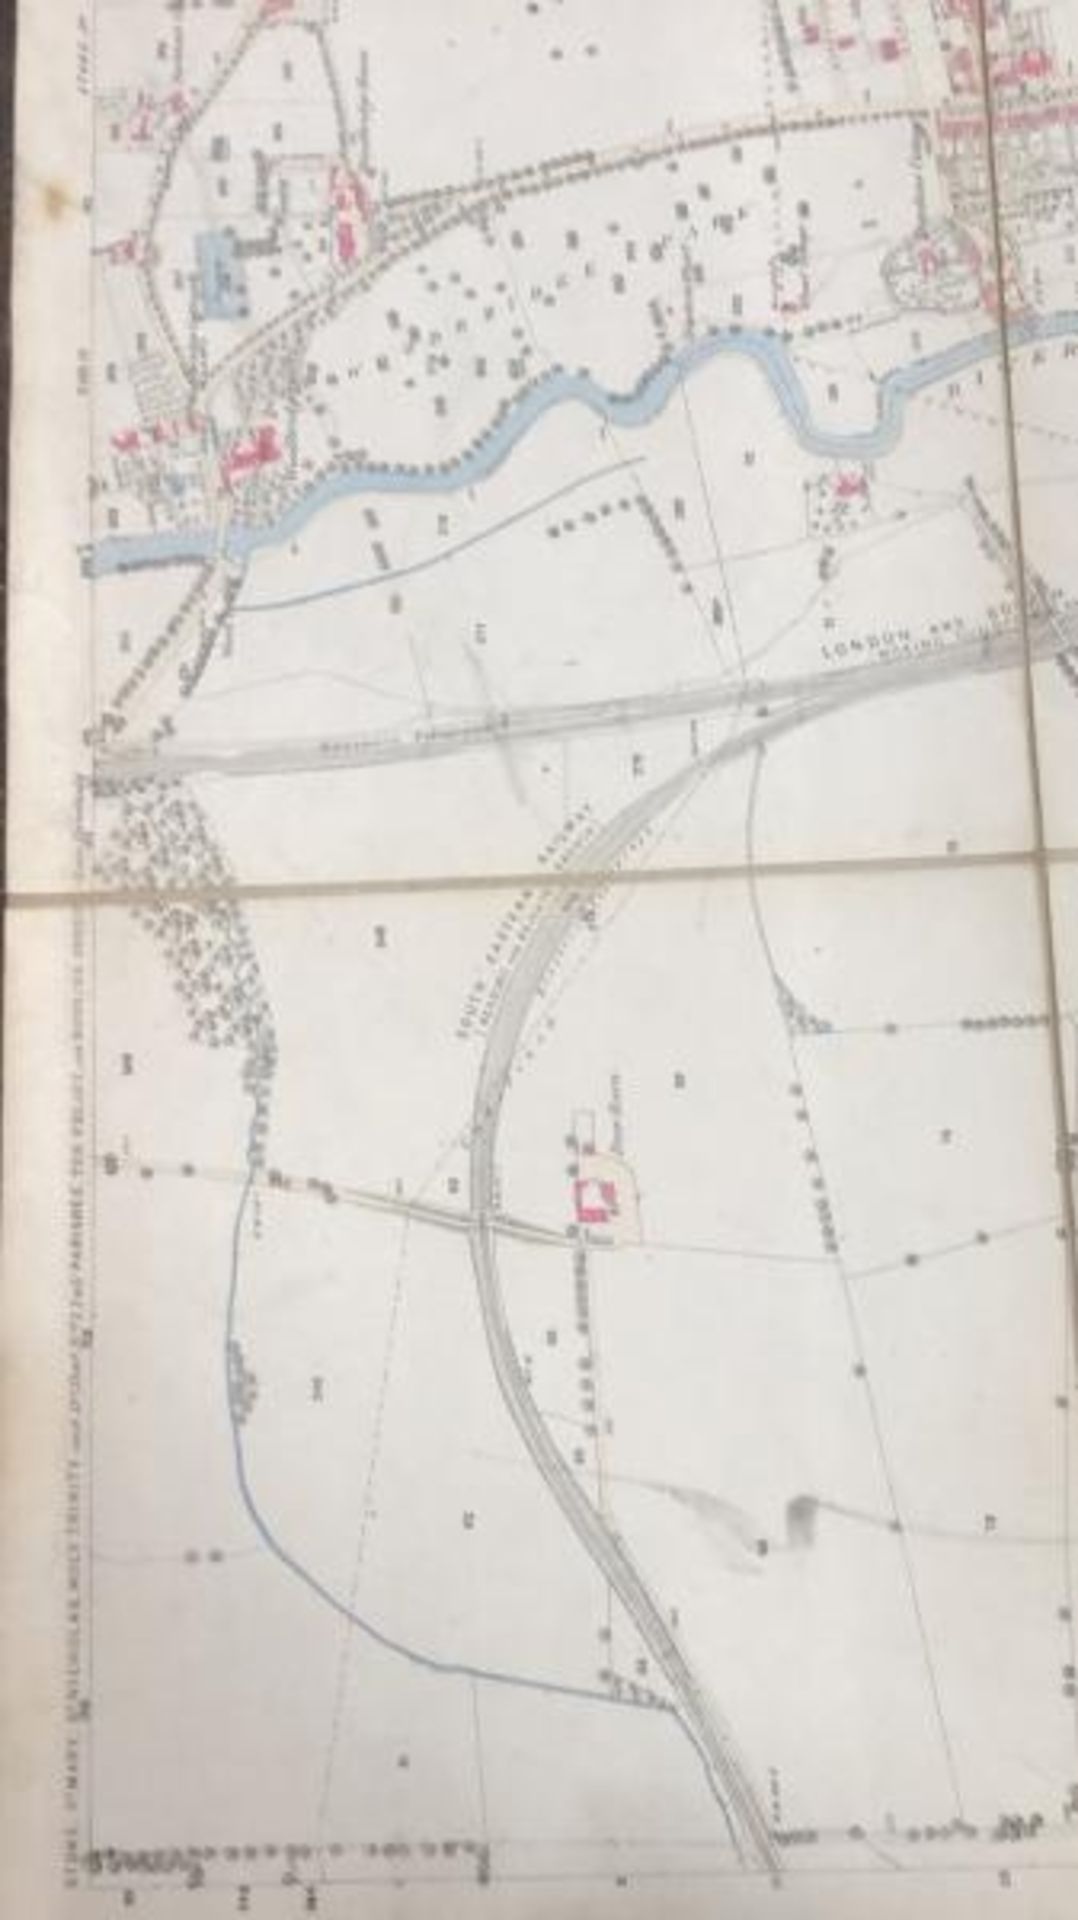 A large 25 inches to 1 mile scale map of Guildford, surveyed in 1827, 202.5cm x 134.5cm opened, - Image 13 of 16